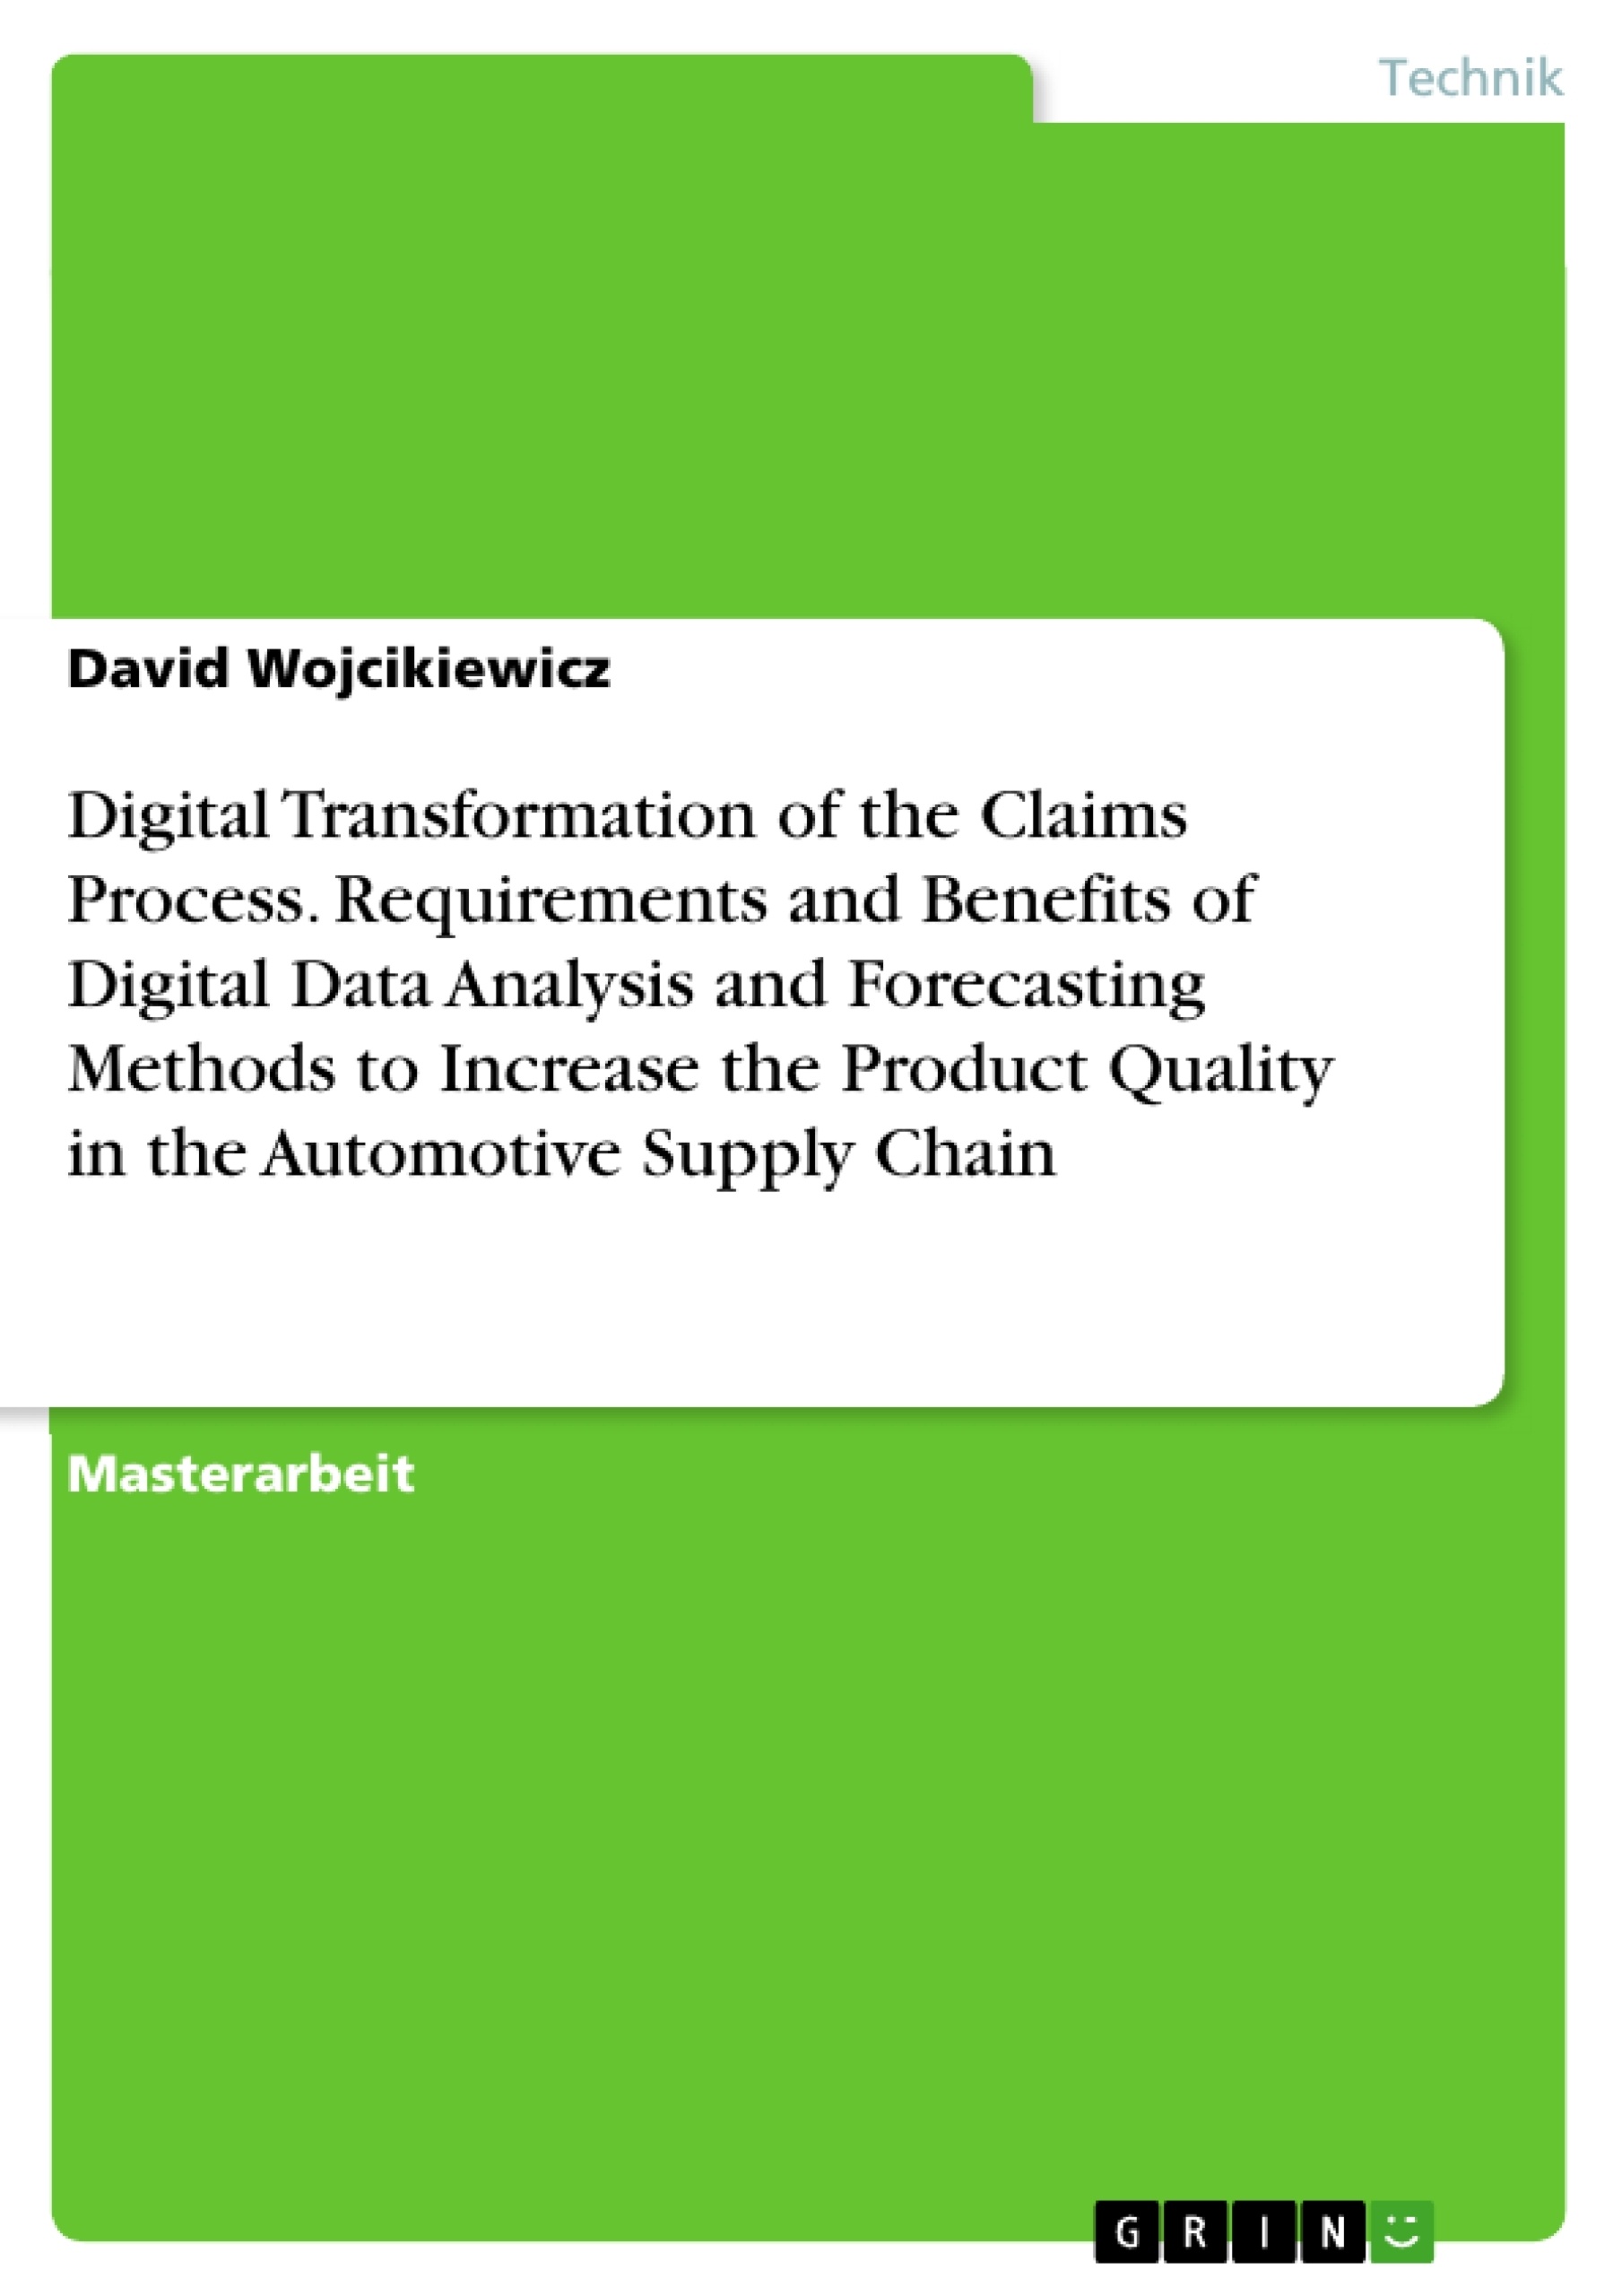 Titel: Digital Transformation of the Claims Process. Requirements and Benefits of Digital Data Analysis and Forecasting Methods to Increase the Product Quality in the Automotive Supply Chain